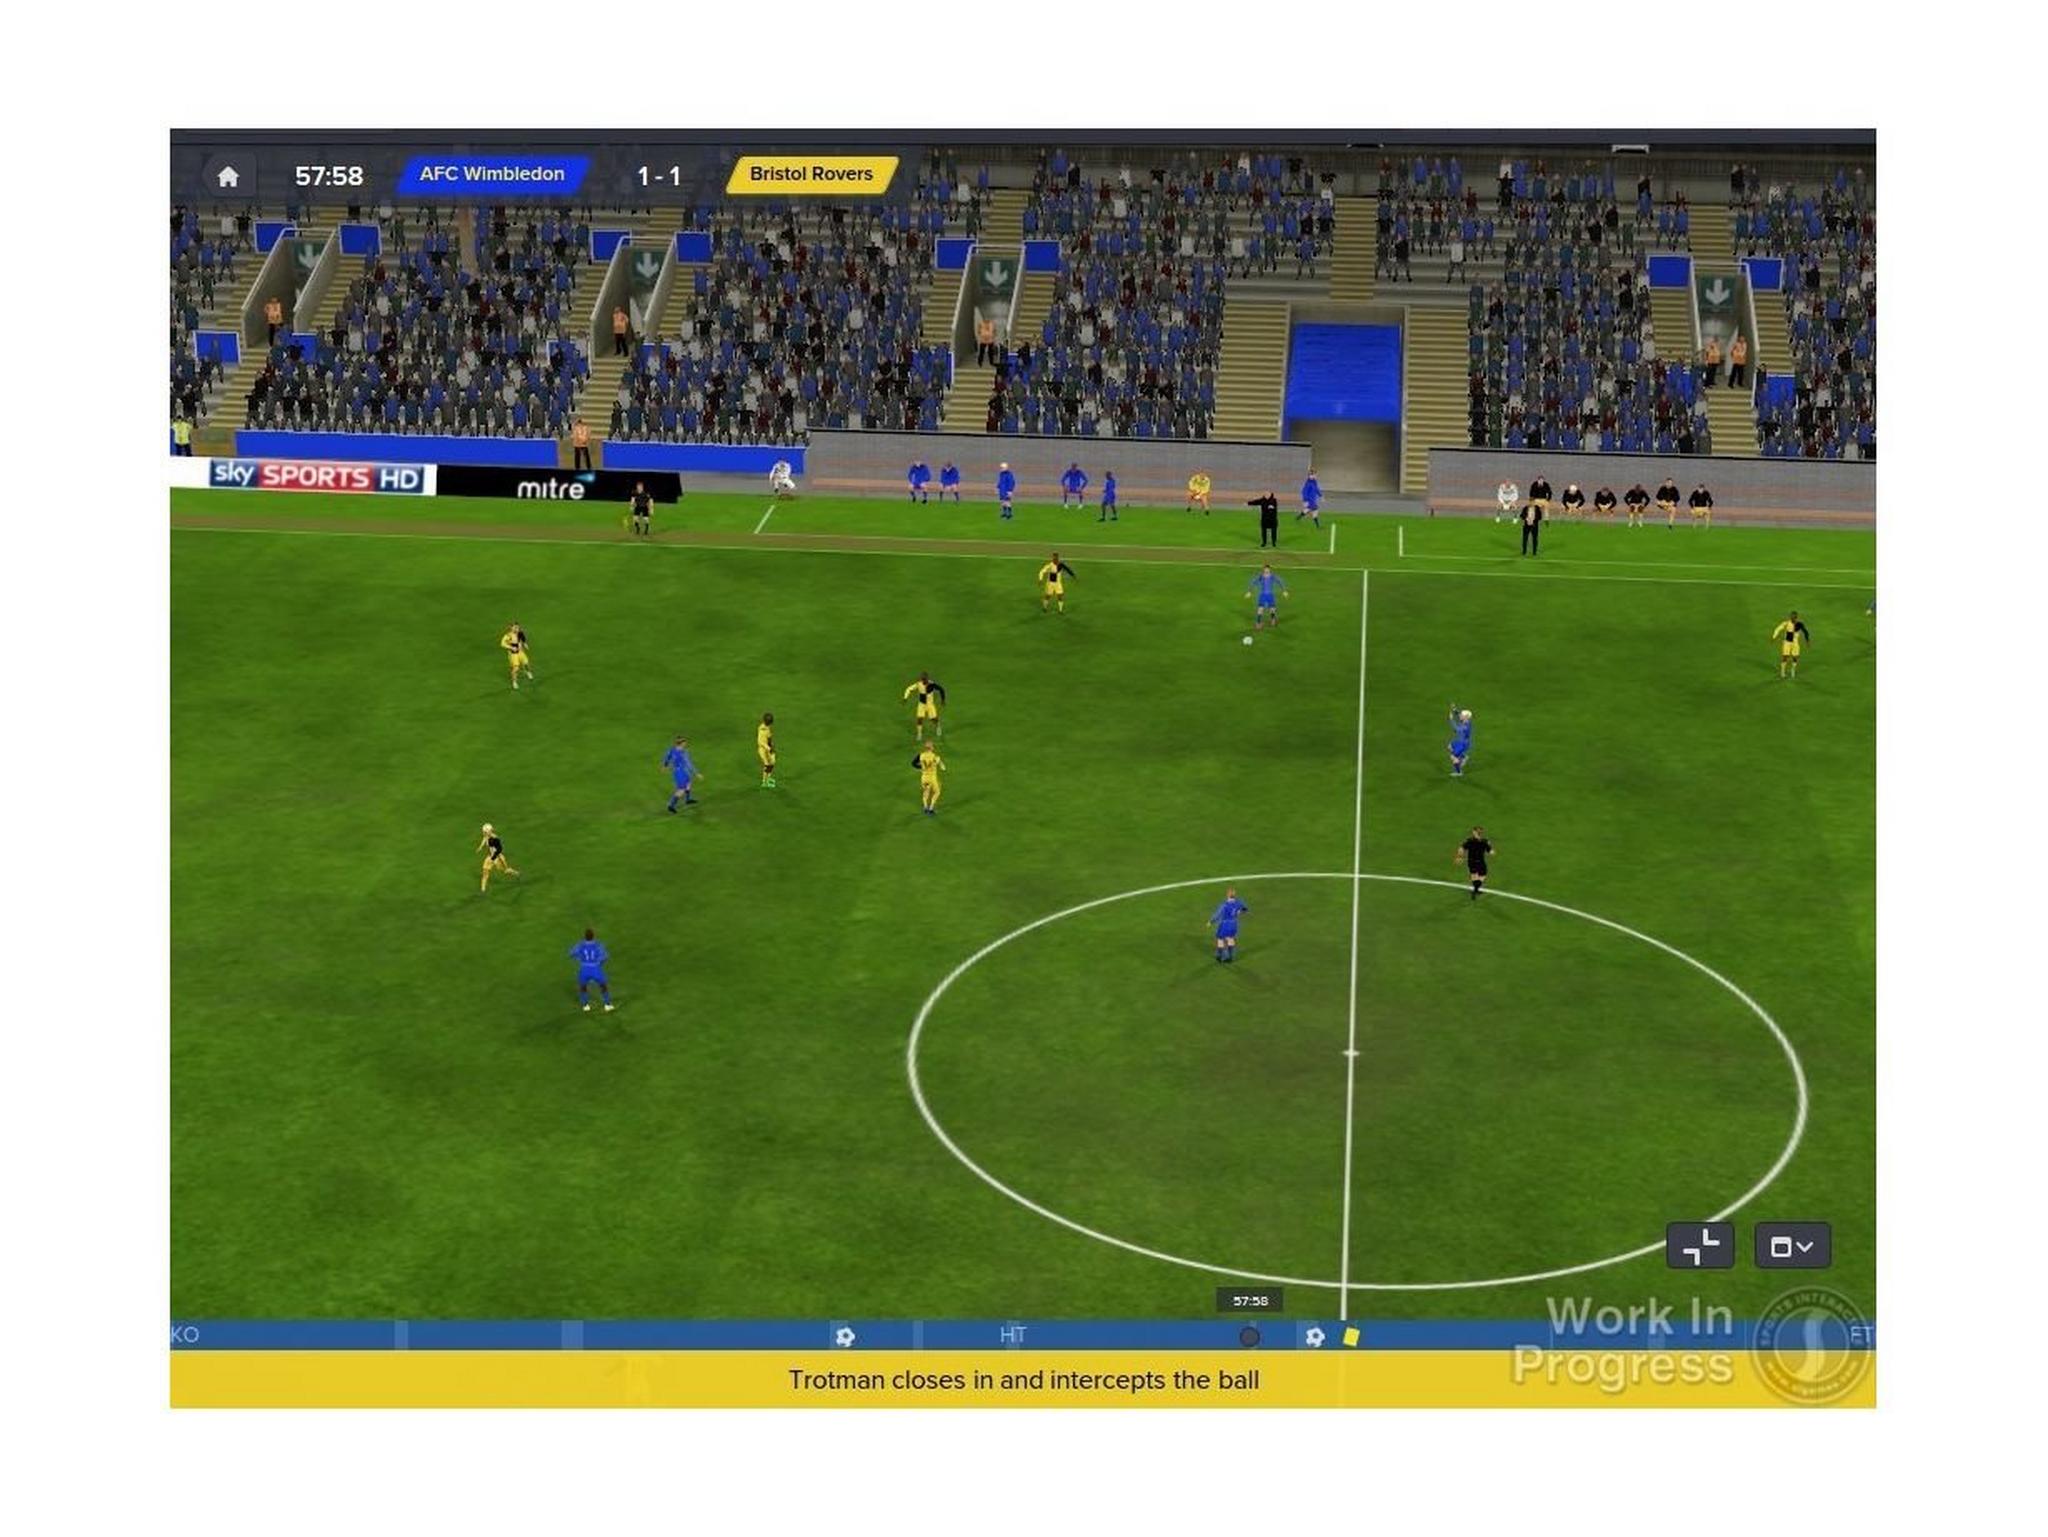 Footbal Manager 2016 - Limited Eition - PC Game